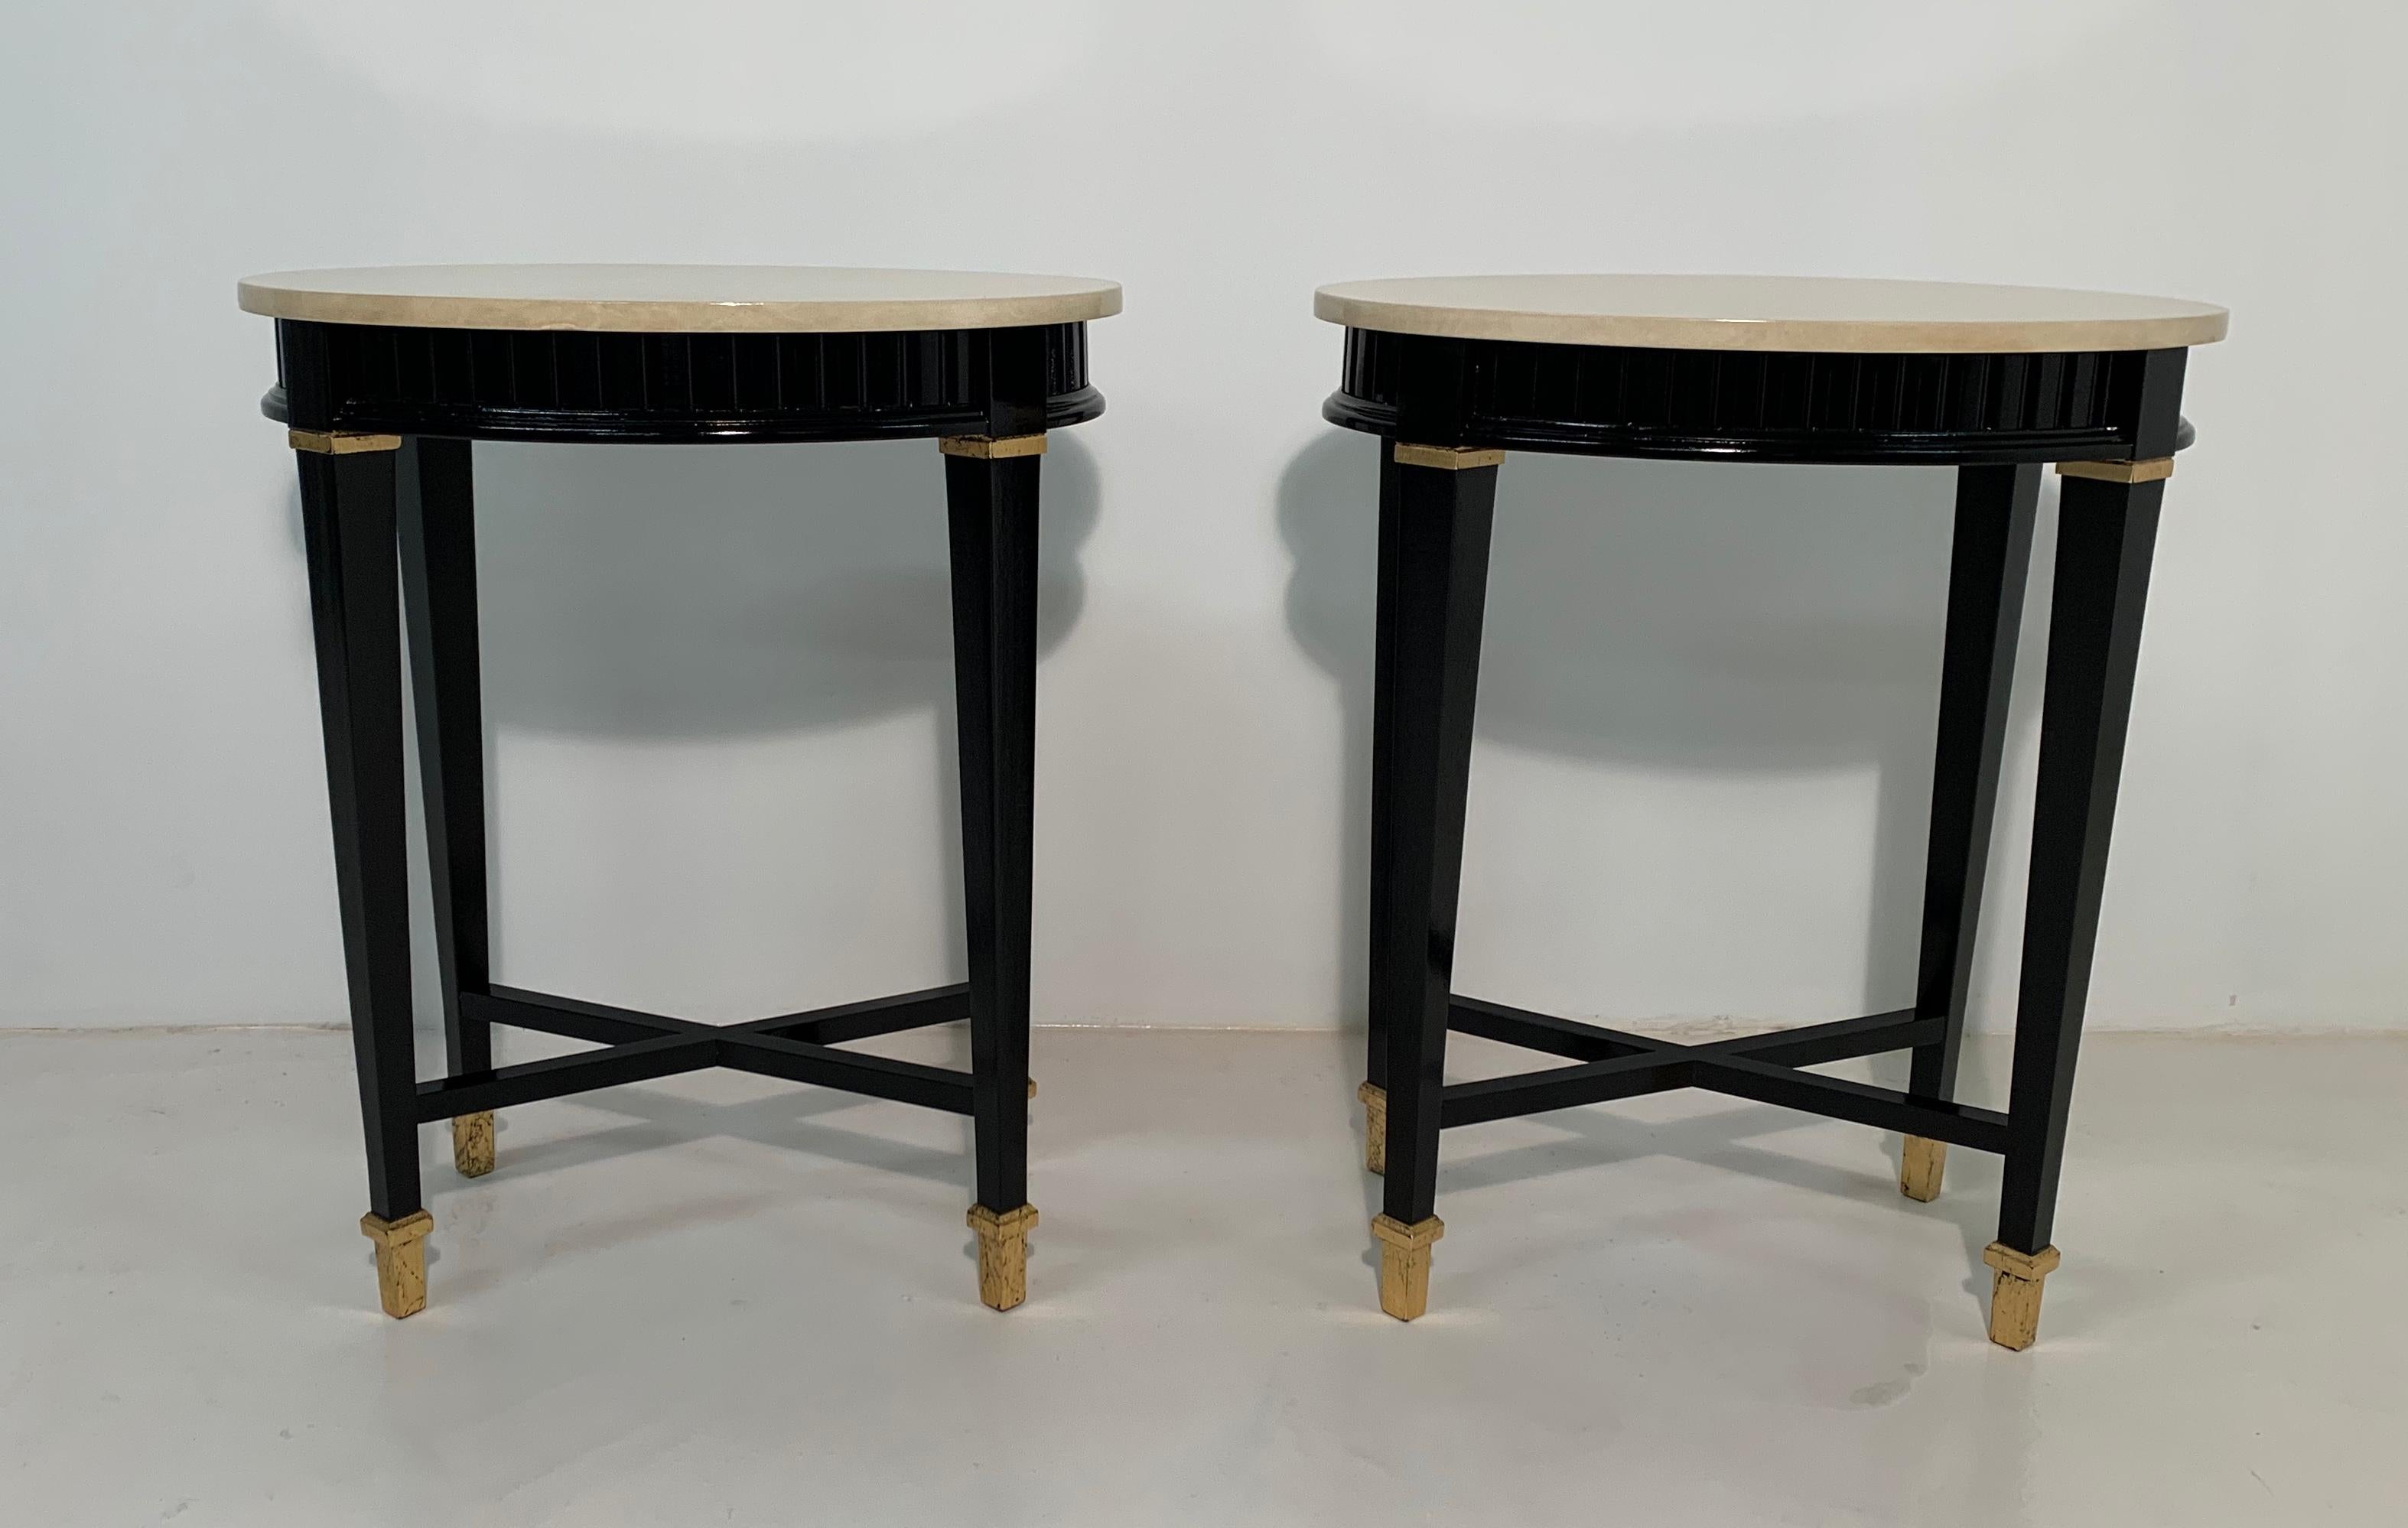 Pair of Art Deco style coffee tables or nightstands made in Italy, parchment top, black legs and profiles and gold leaf details.
Completely restored.